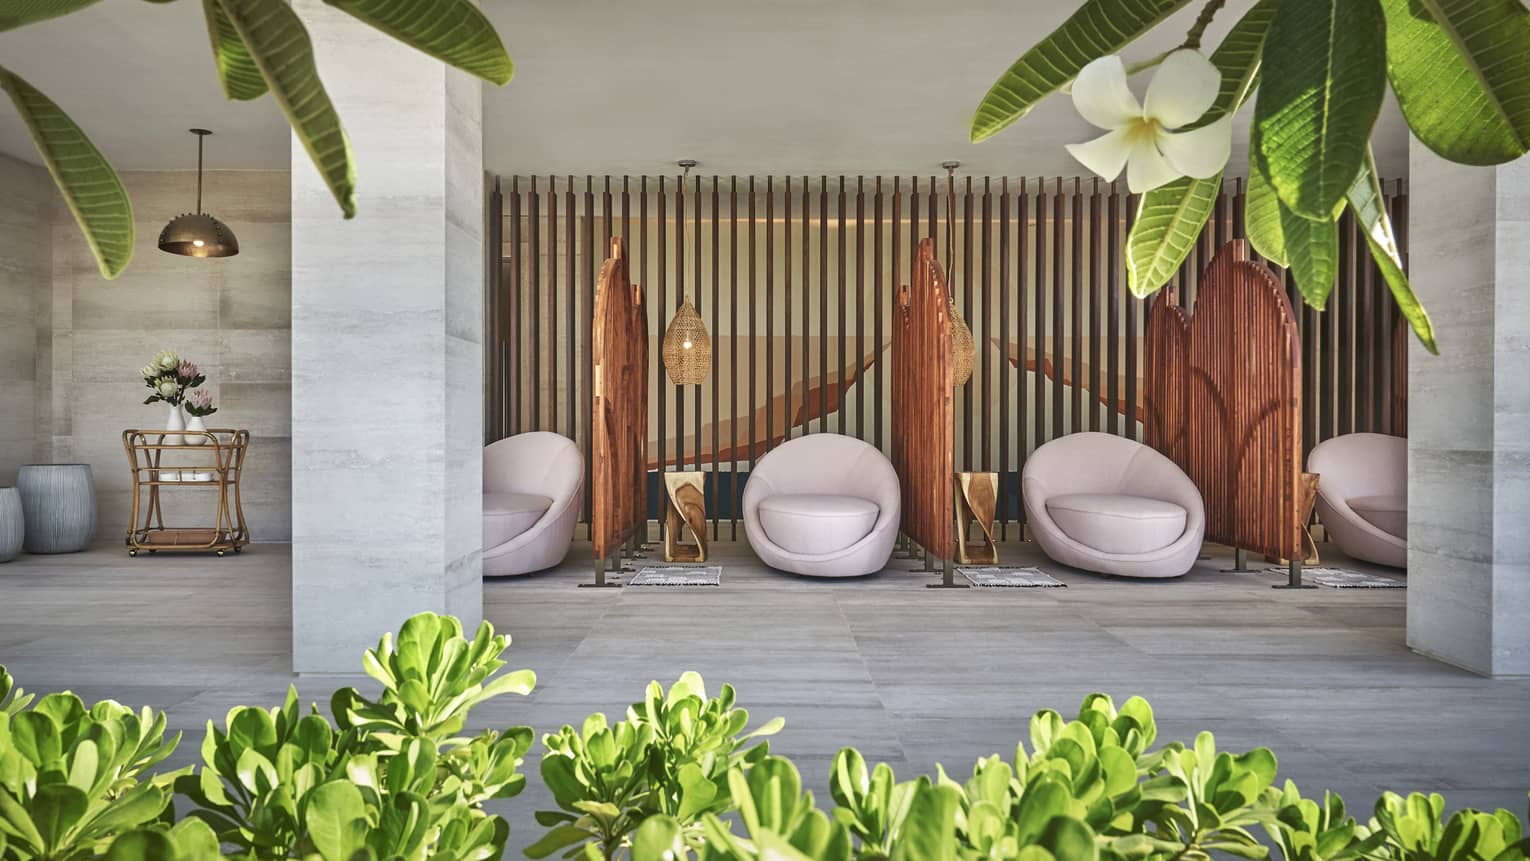 White egg-shaped spa chairs are separated by rattan walls in the four seasons resort los cabos spa terrace